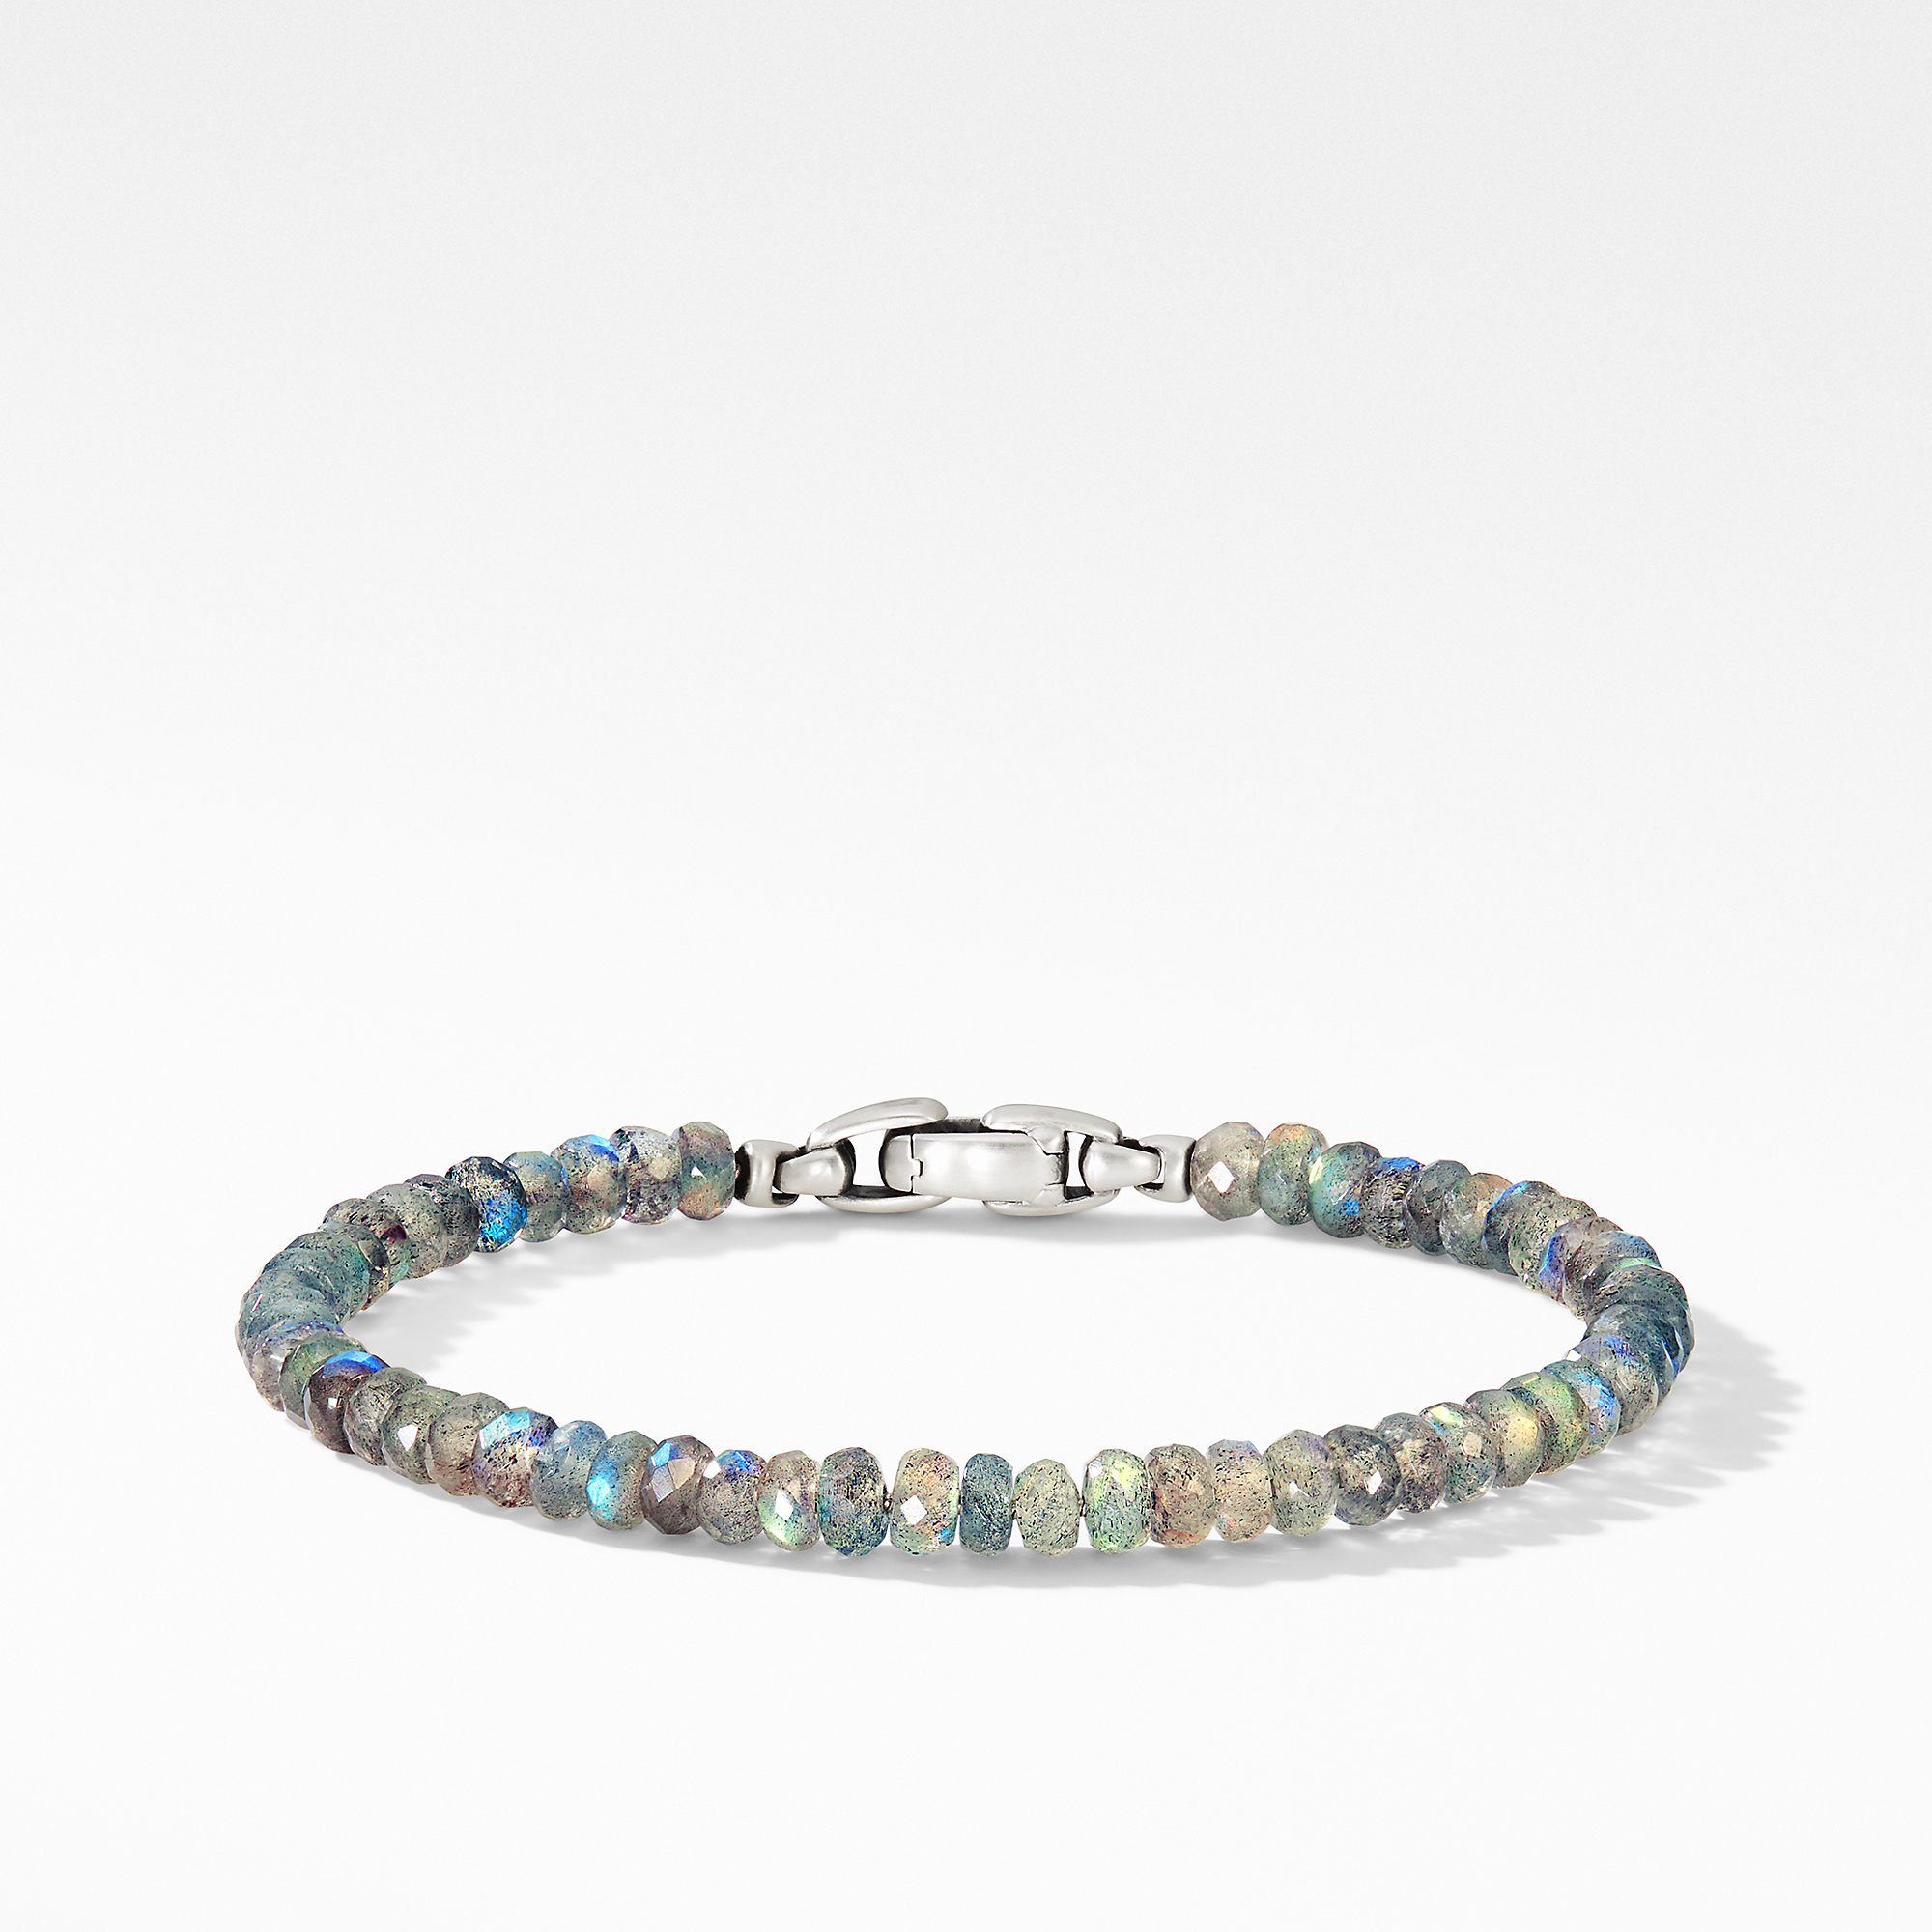 Faceted Bead Bracelet with Labradorite